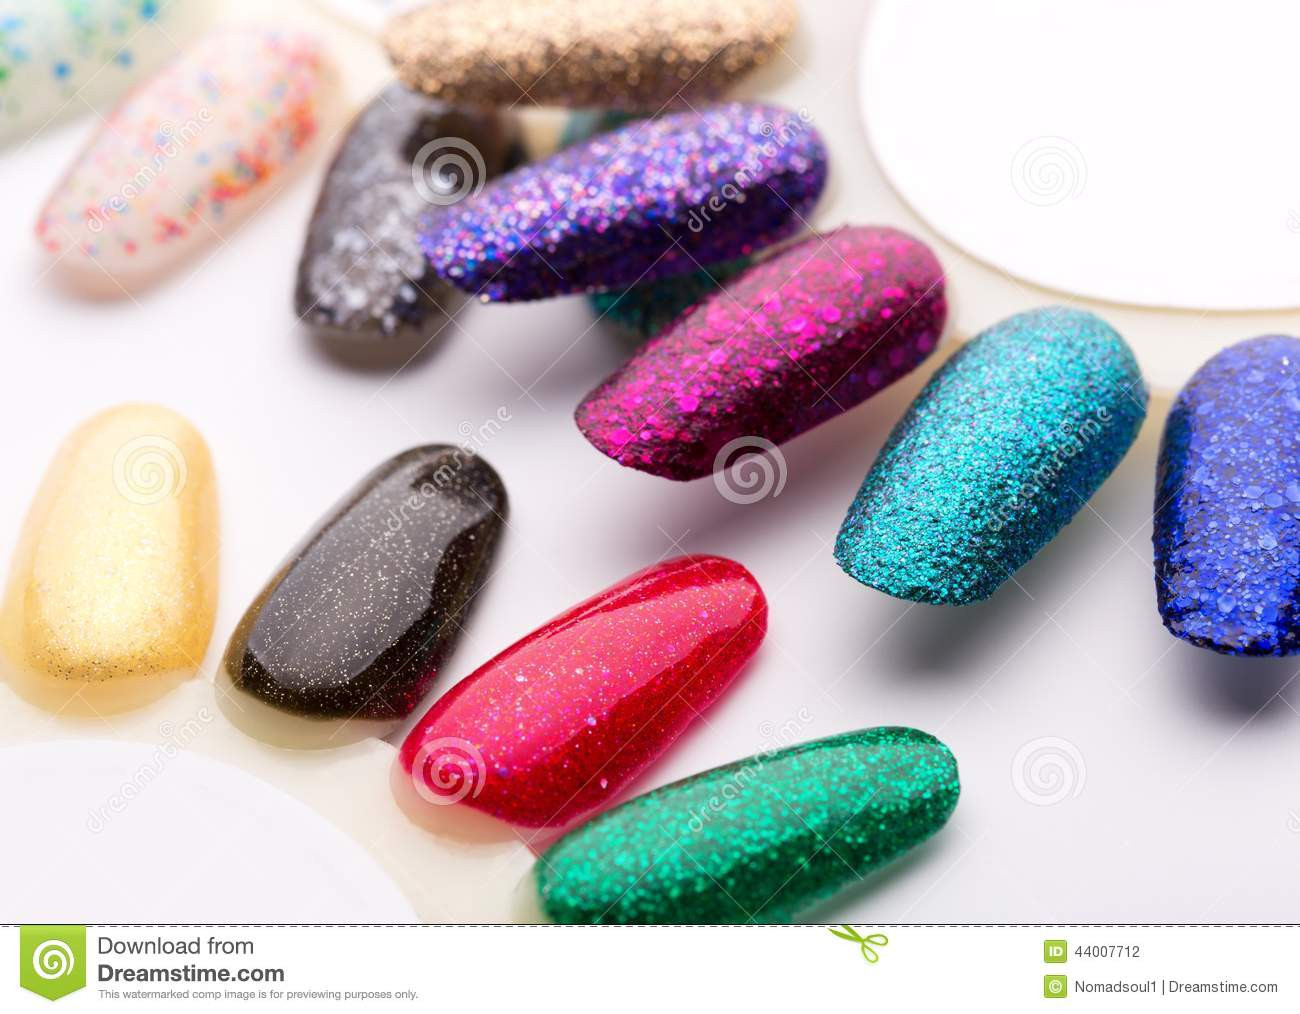 In Style Nail Colors
 Nail Polish In Different Fashion Colors Stock